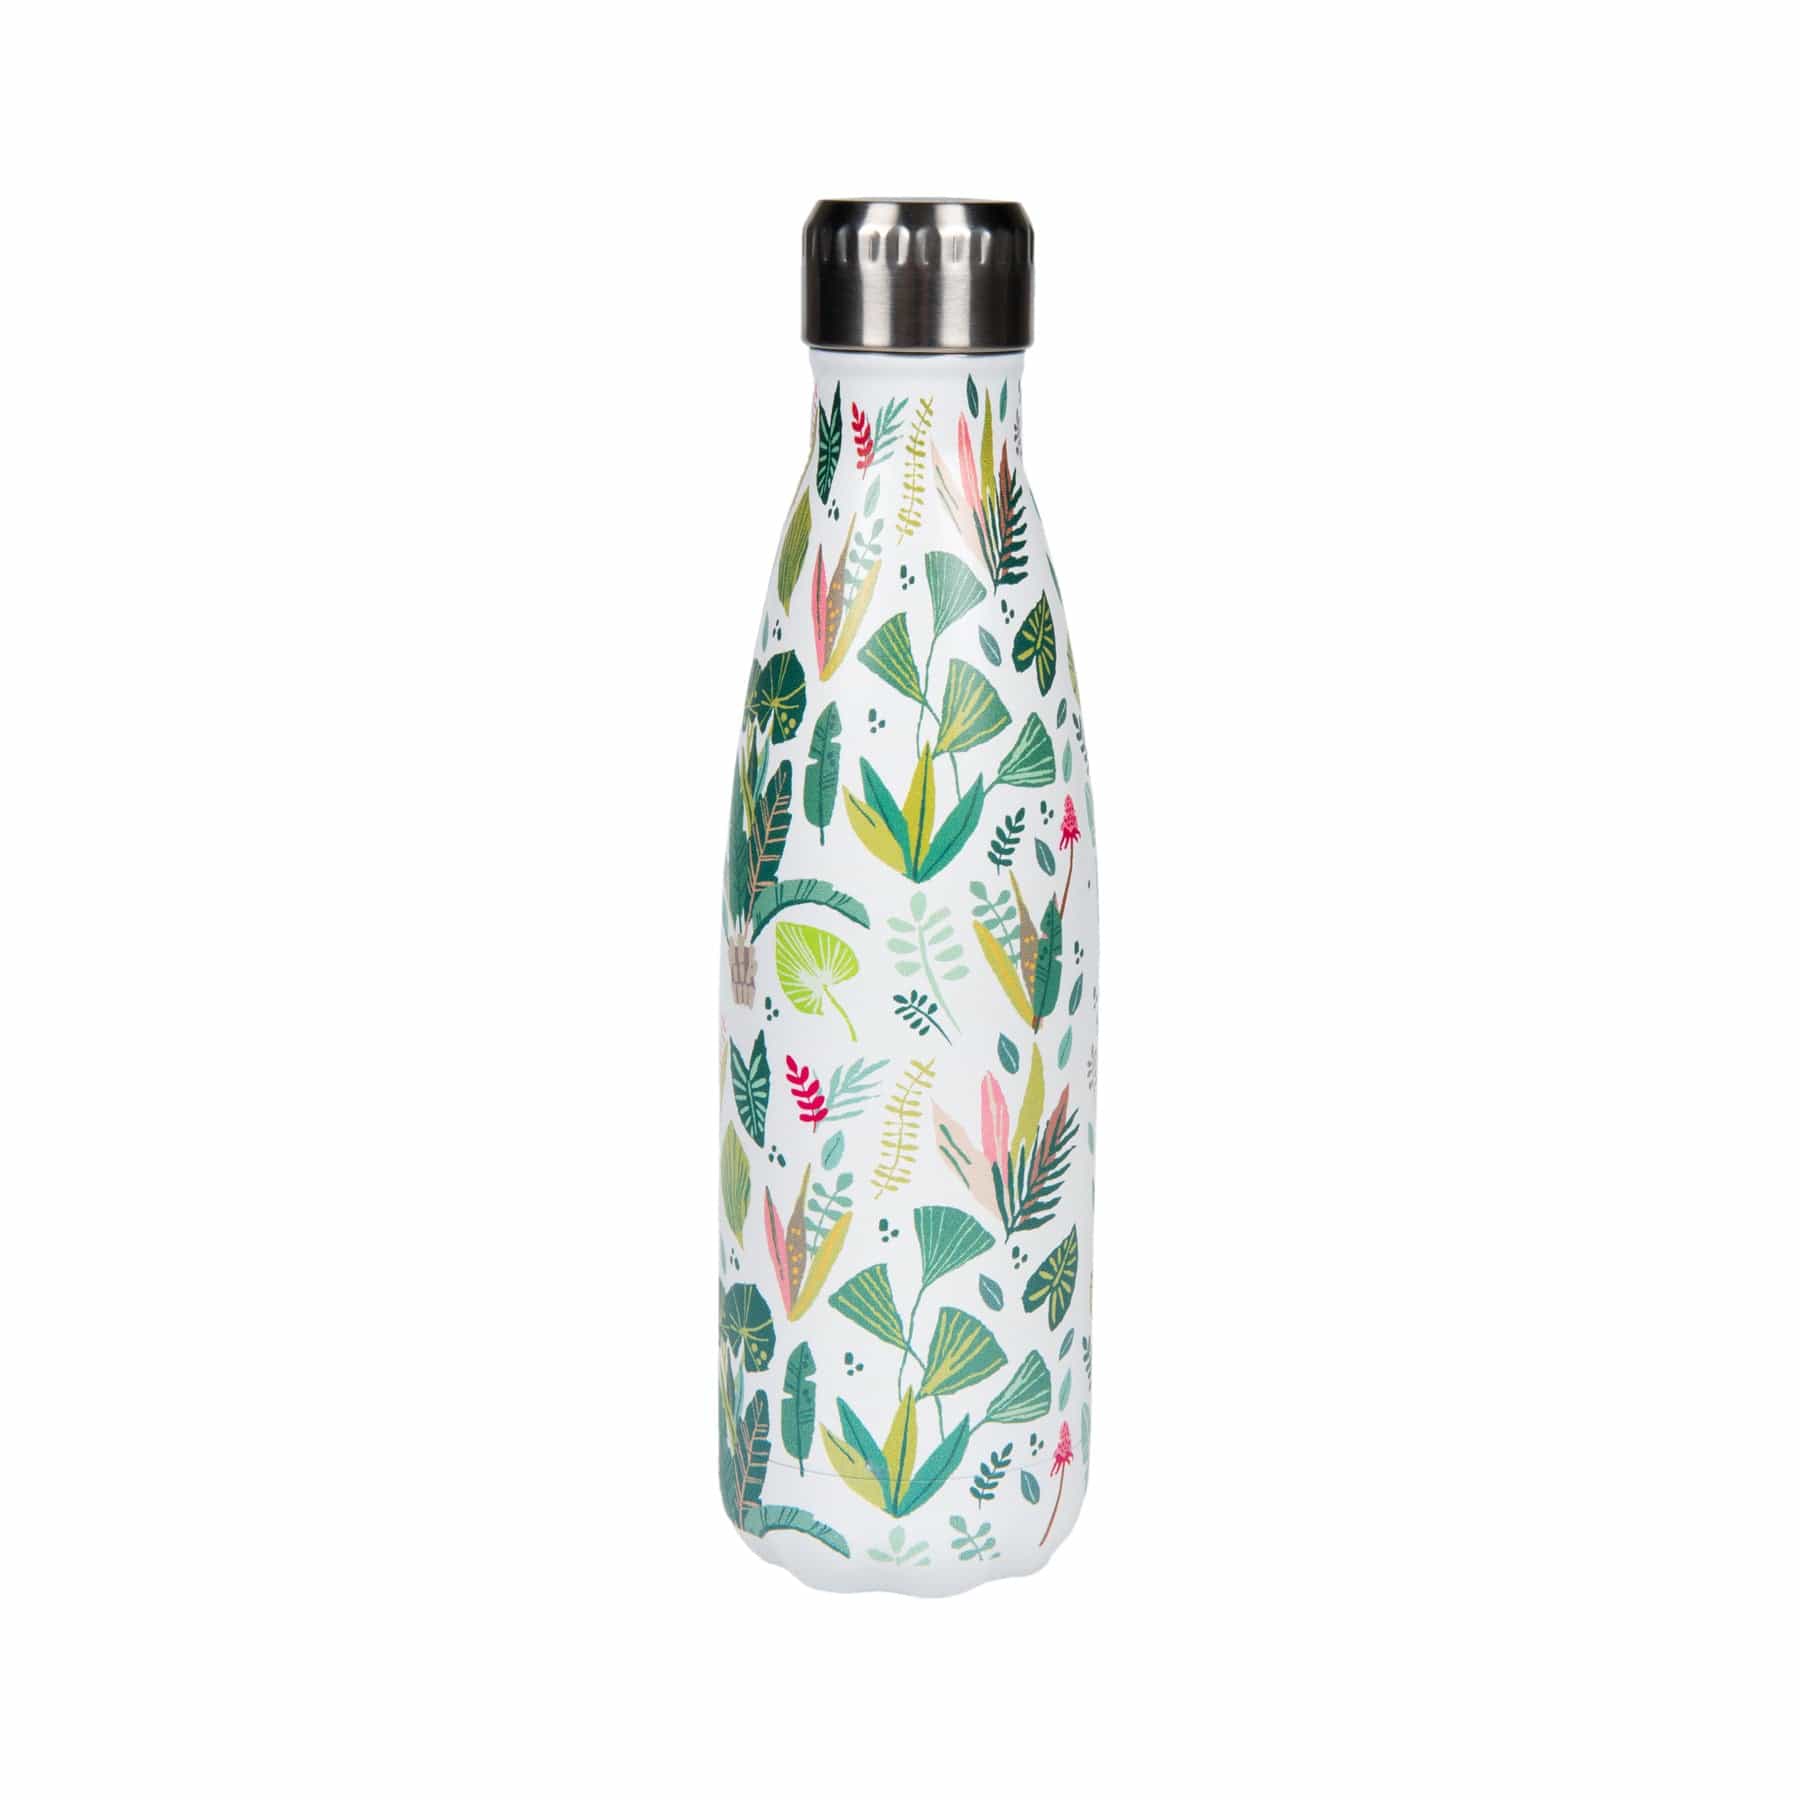 Insulated stainless steel water bottle with tropical leaf pattern on white background